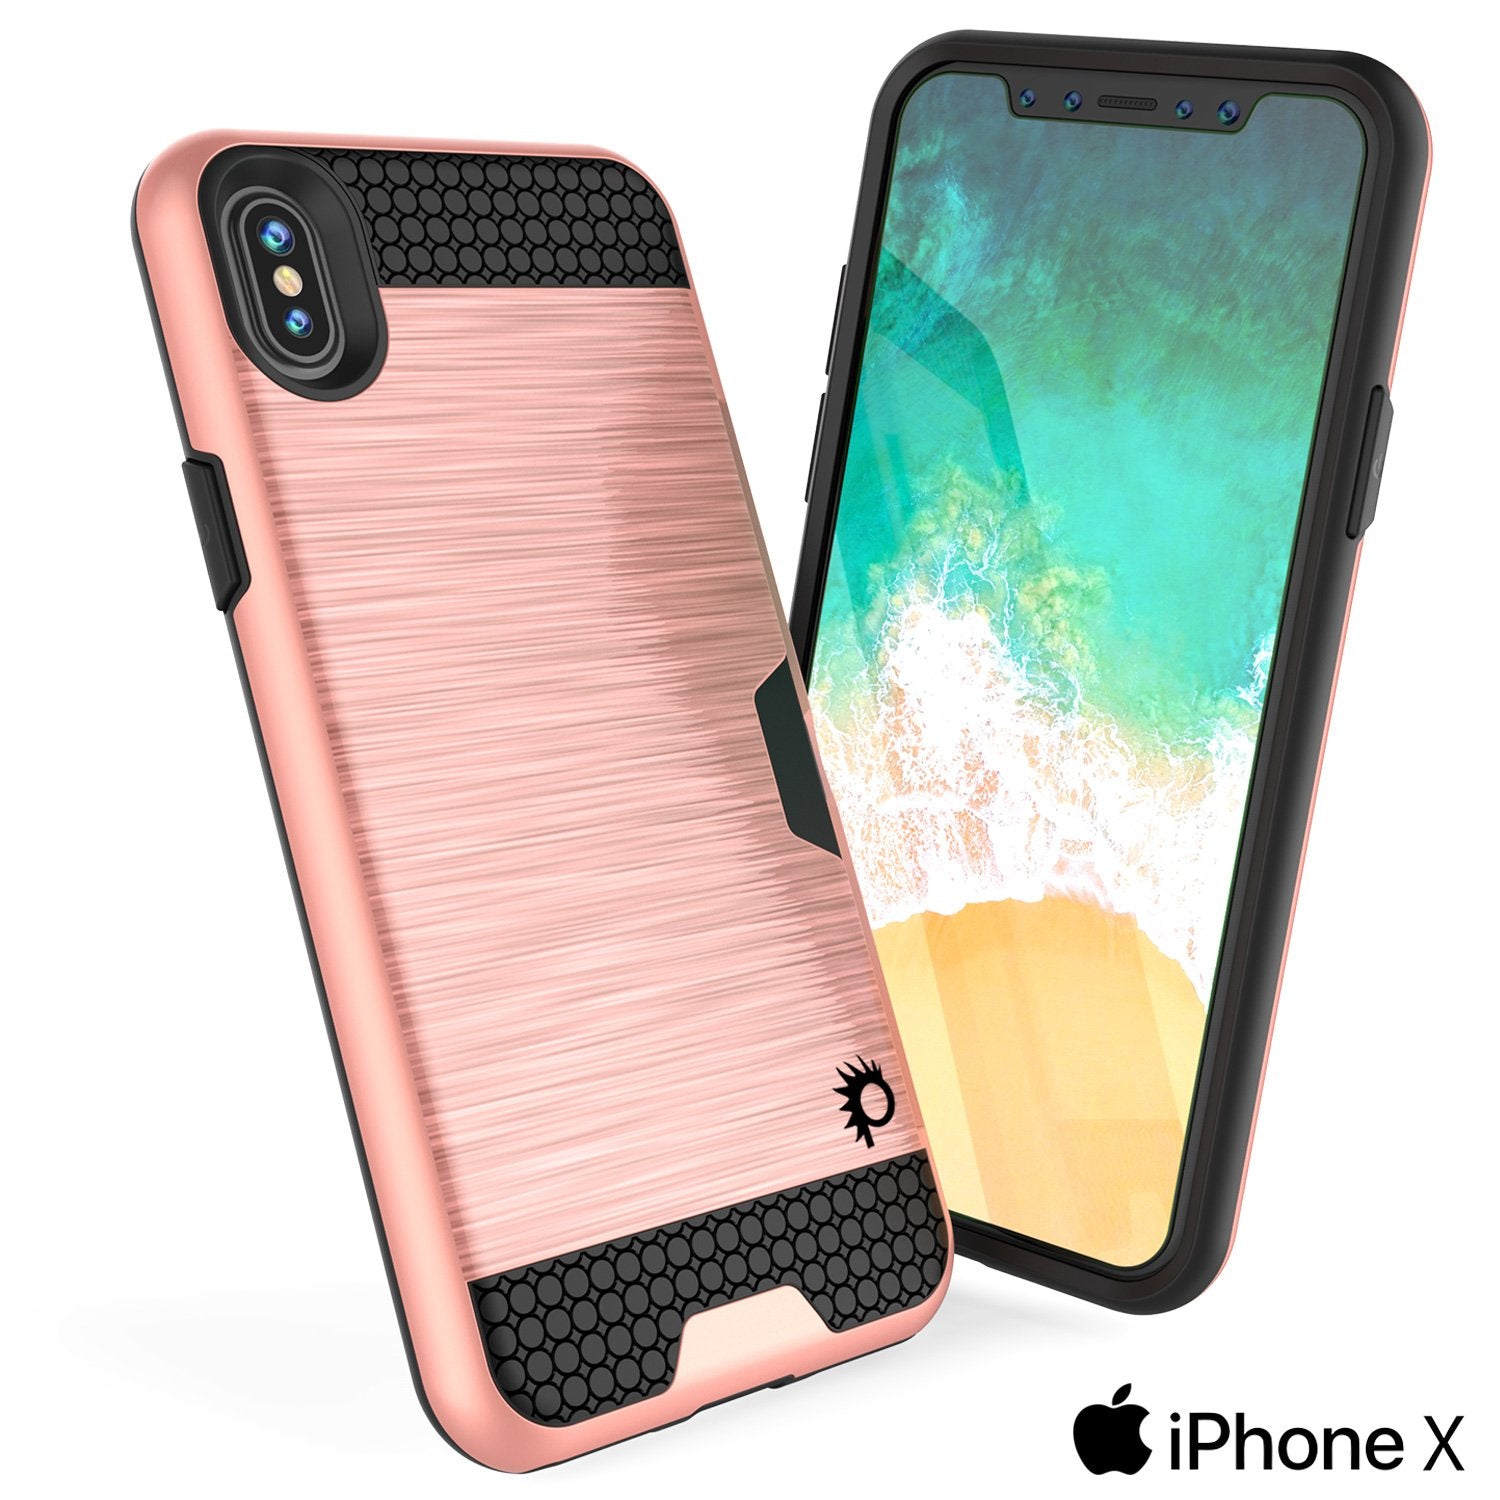 iPhone X Case, PUNKcase [SLOT Series] Slim Fit Dual-Layer Armor Cover & Tempered Glass PUNKSHIELD Screen Protector for Apple iPhone X [Rose Gold]